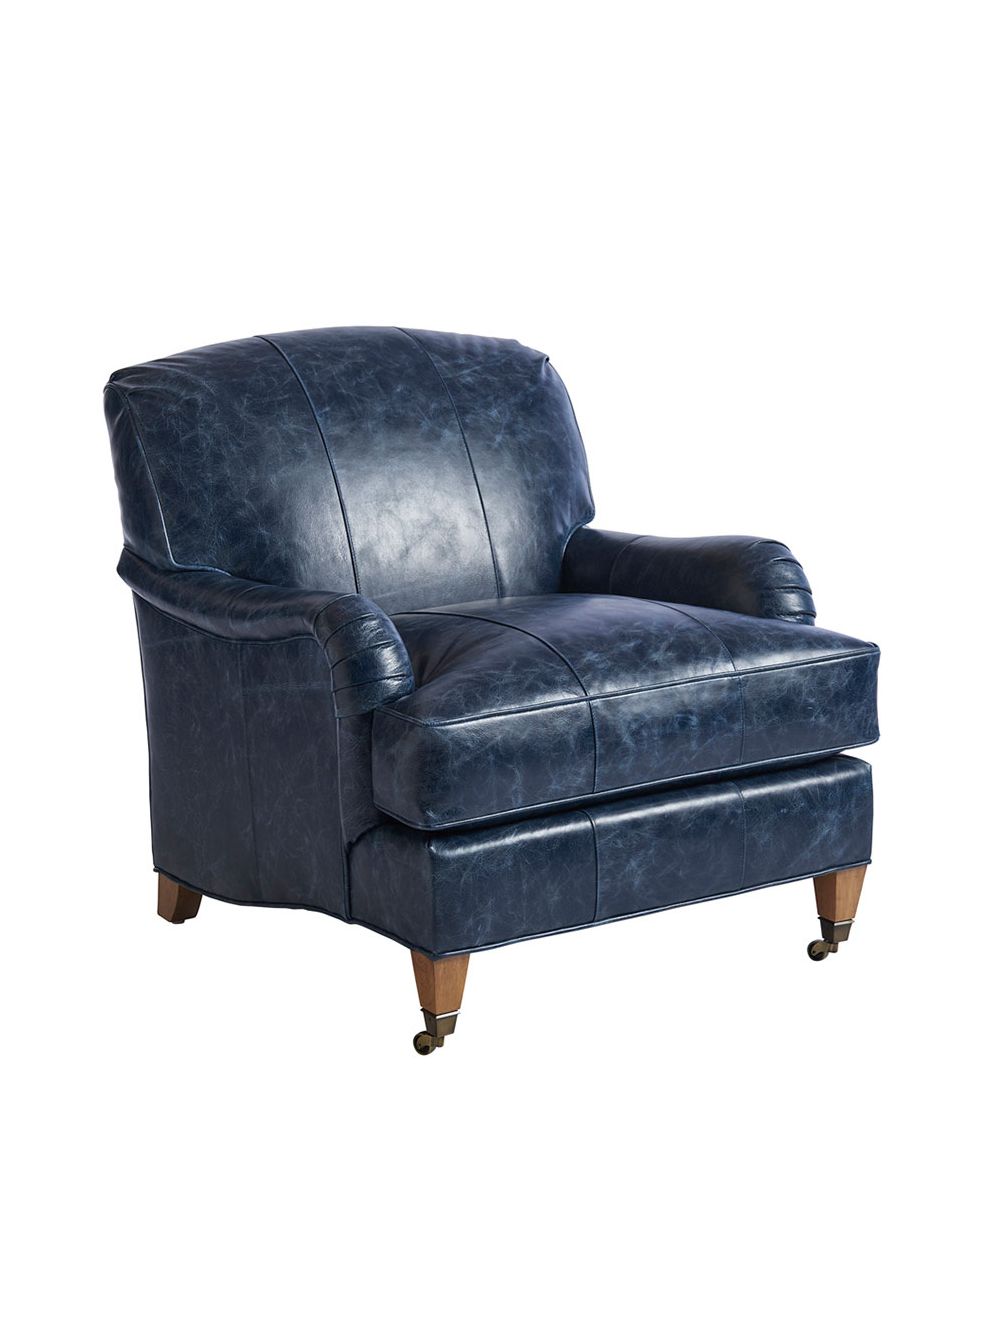 Sydney Leather Chair Navy Blue, Navy Blue Leather Recliner